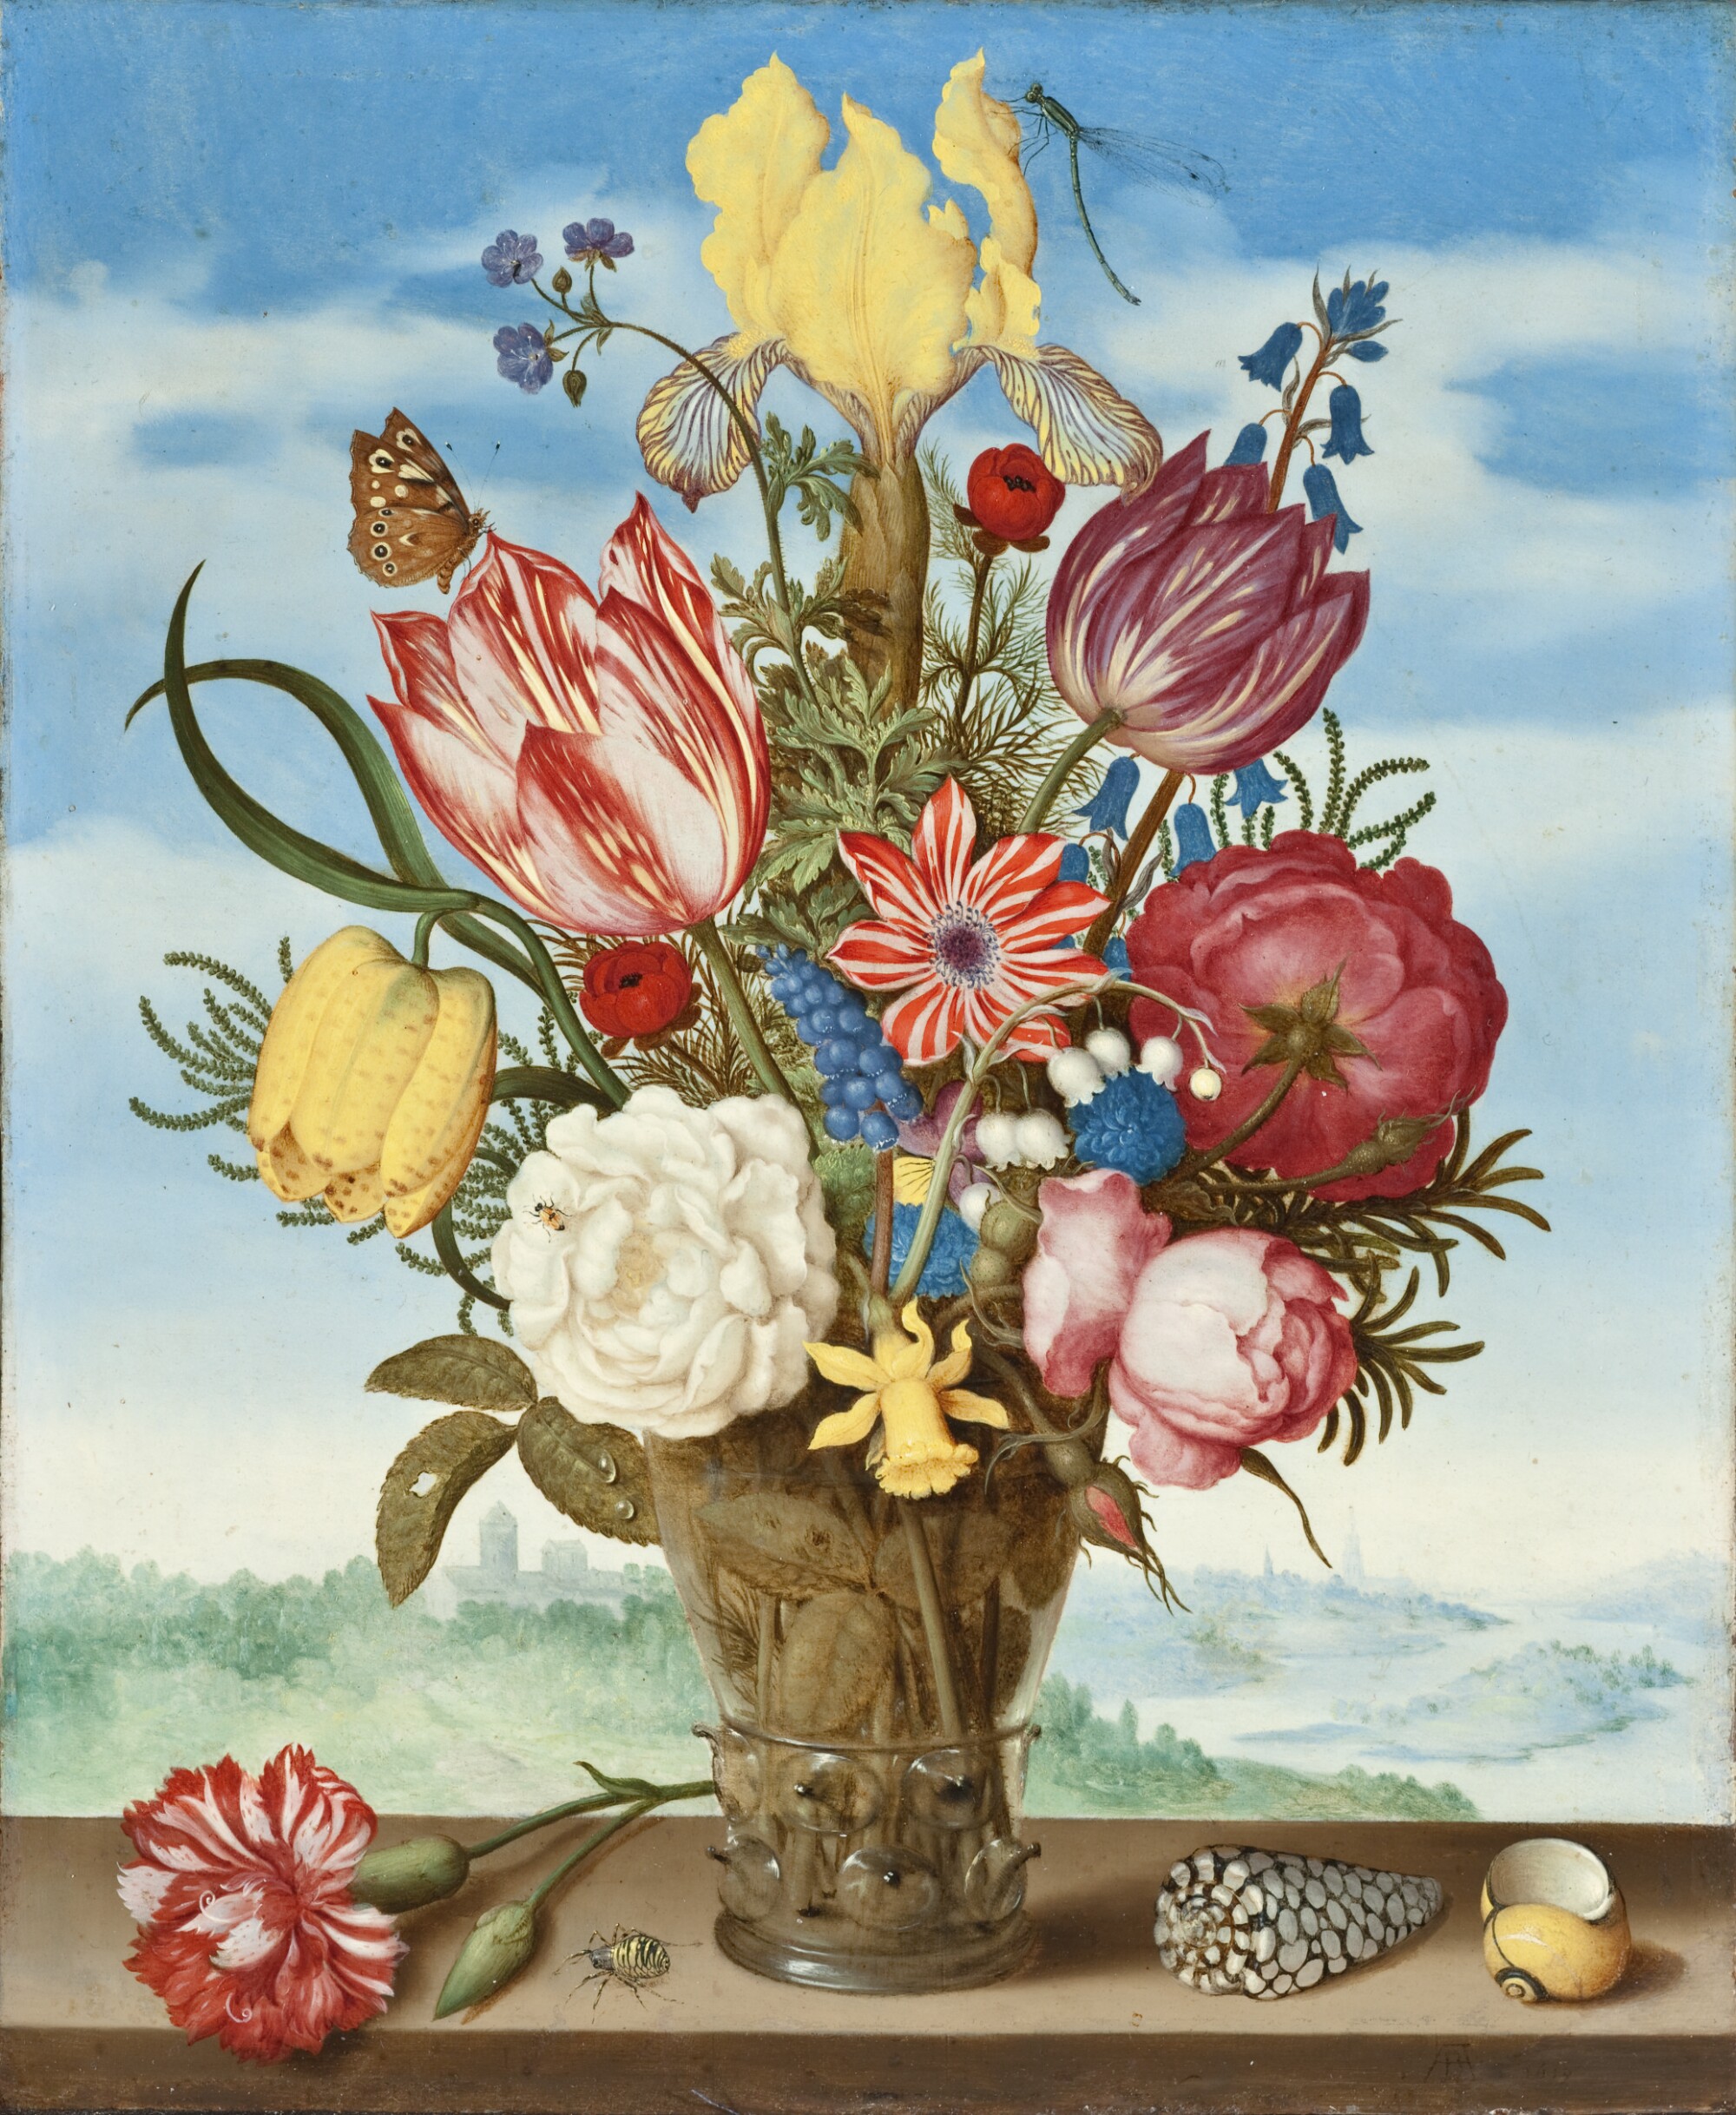 A large colorful bouquet of flowers flows from a vase